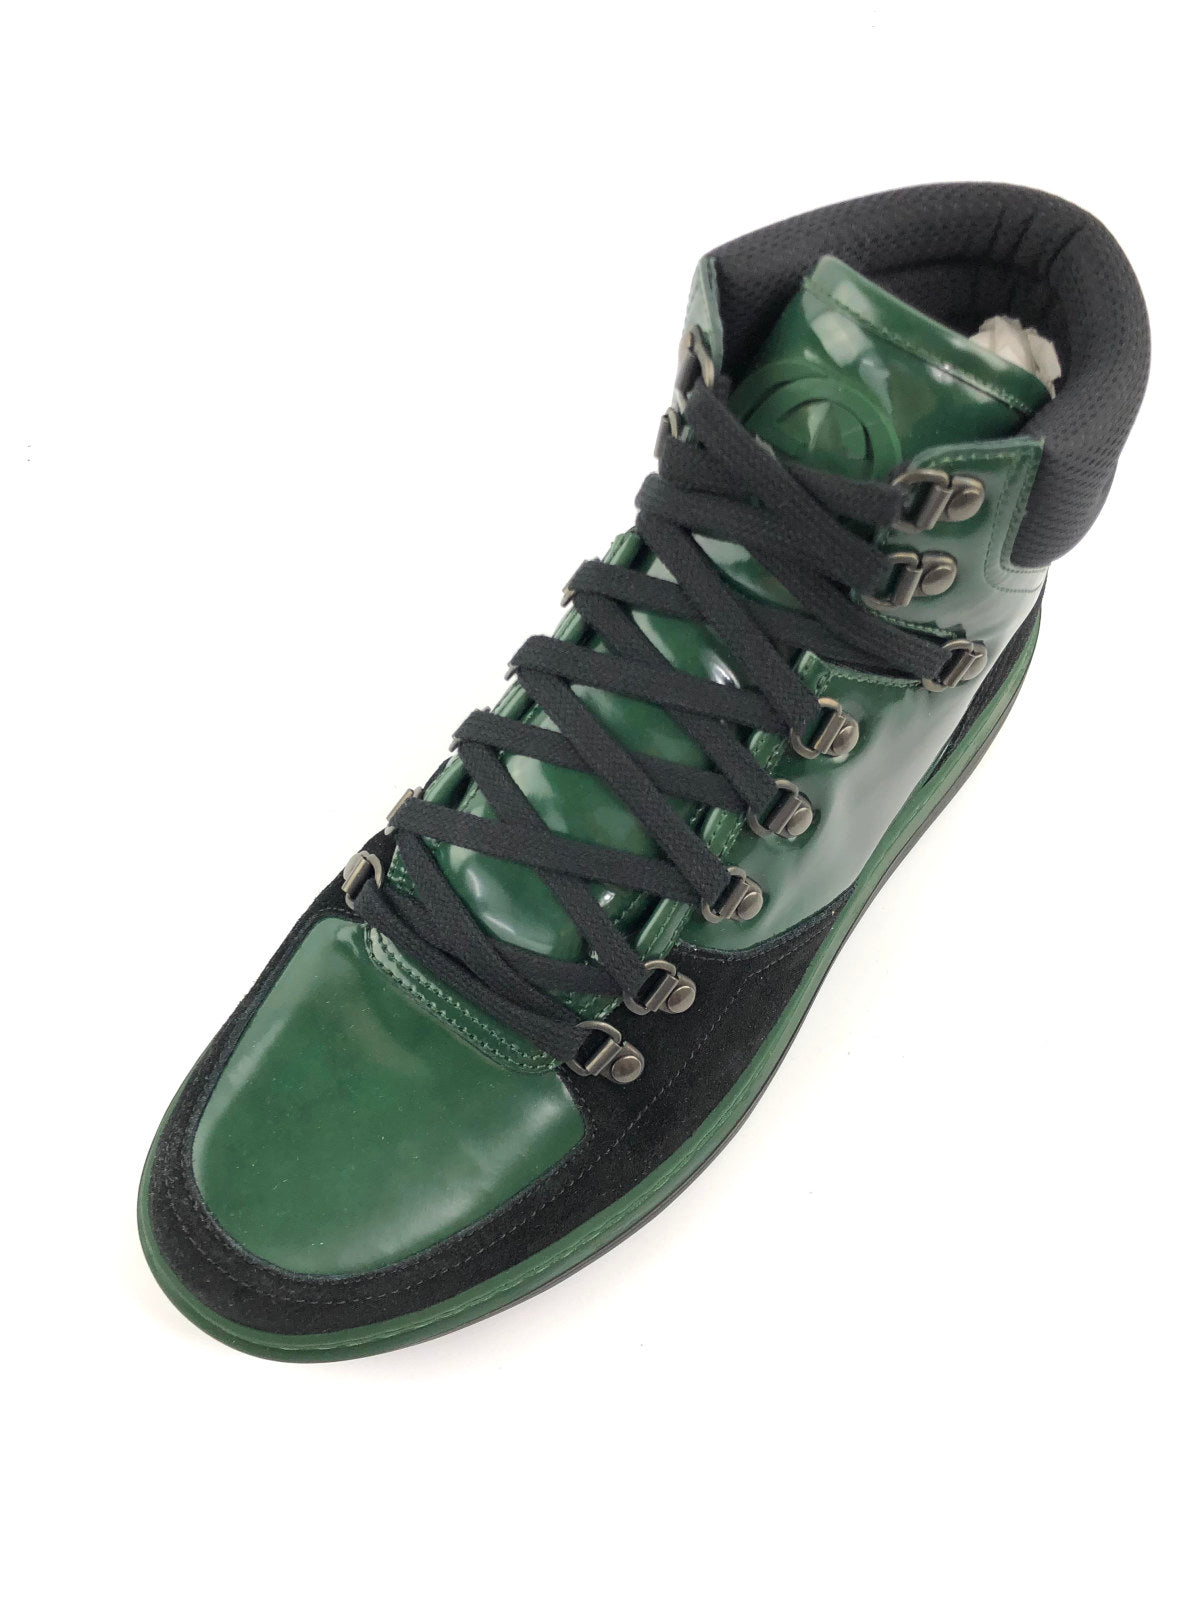 GUCCI Dark Green Suede Contrast Combo MENS High Top Sneakers Size 8 The Ladies